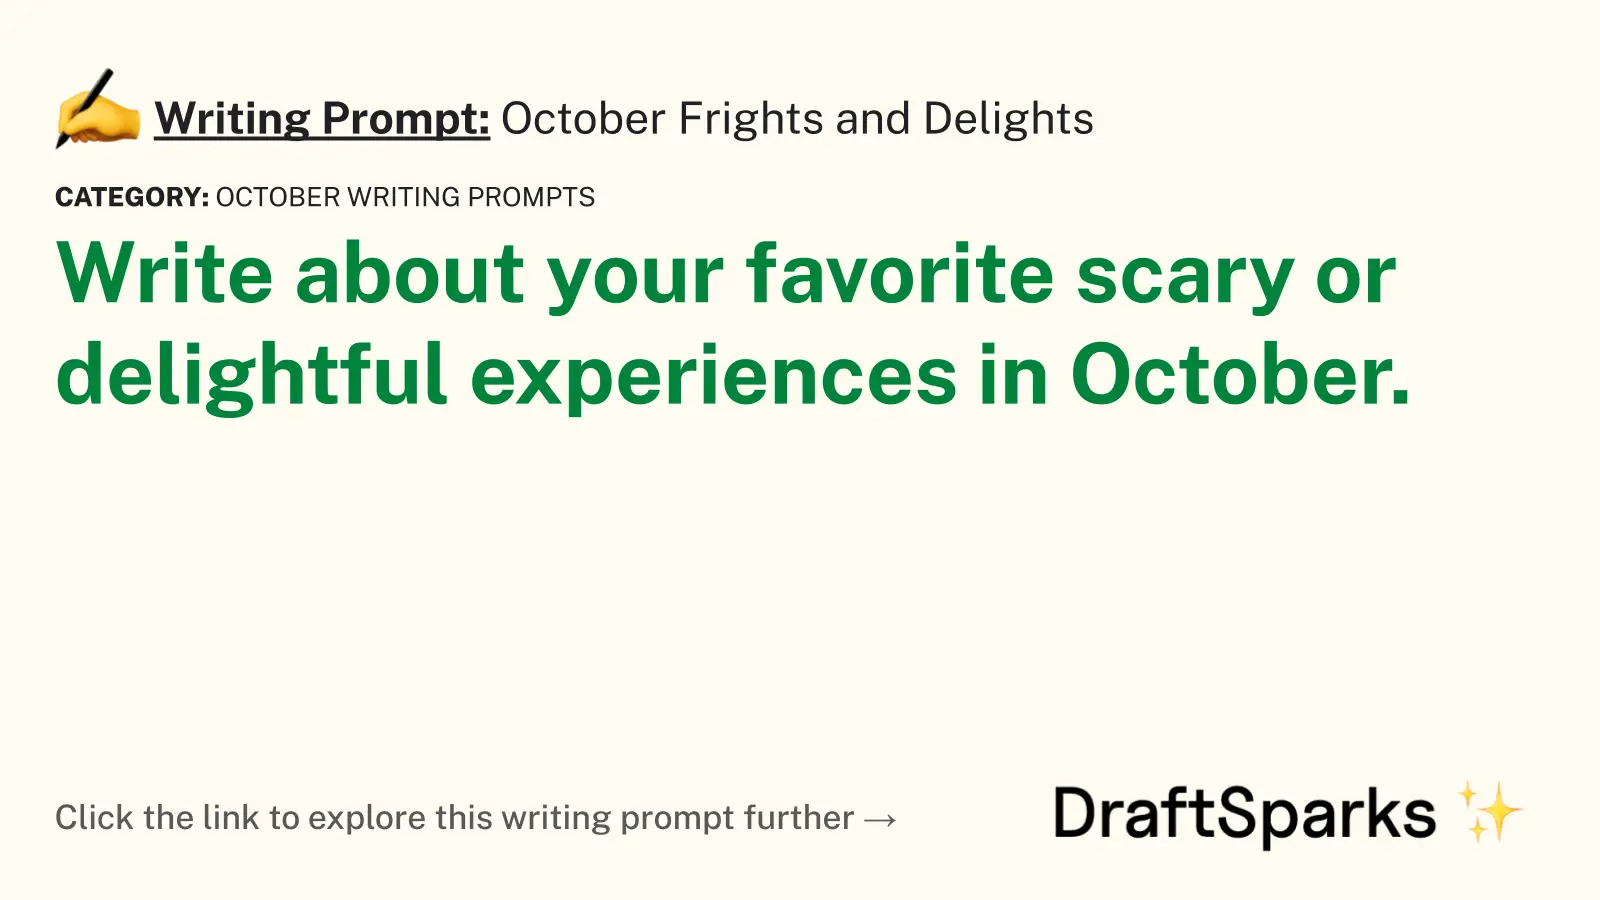 October Frights and Delights